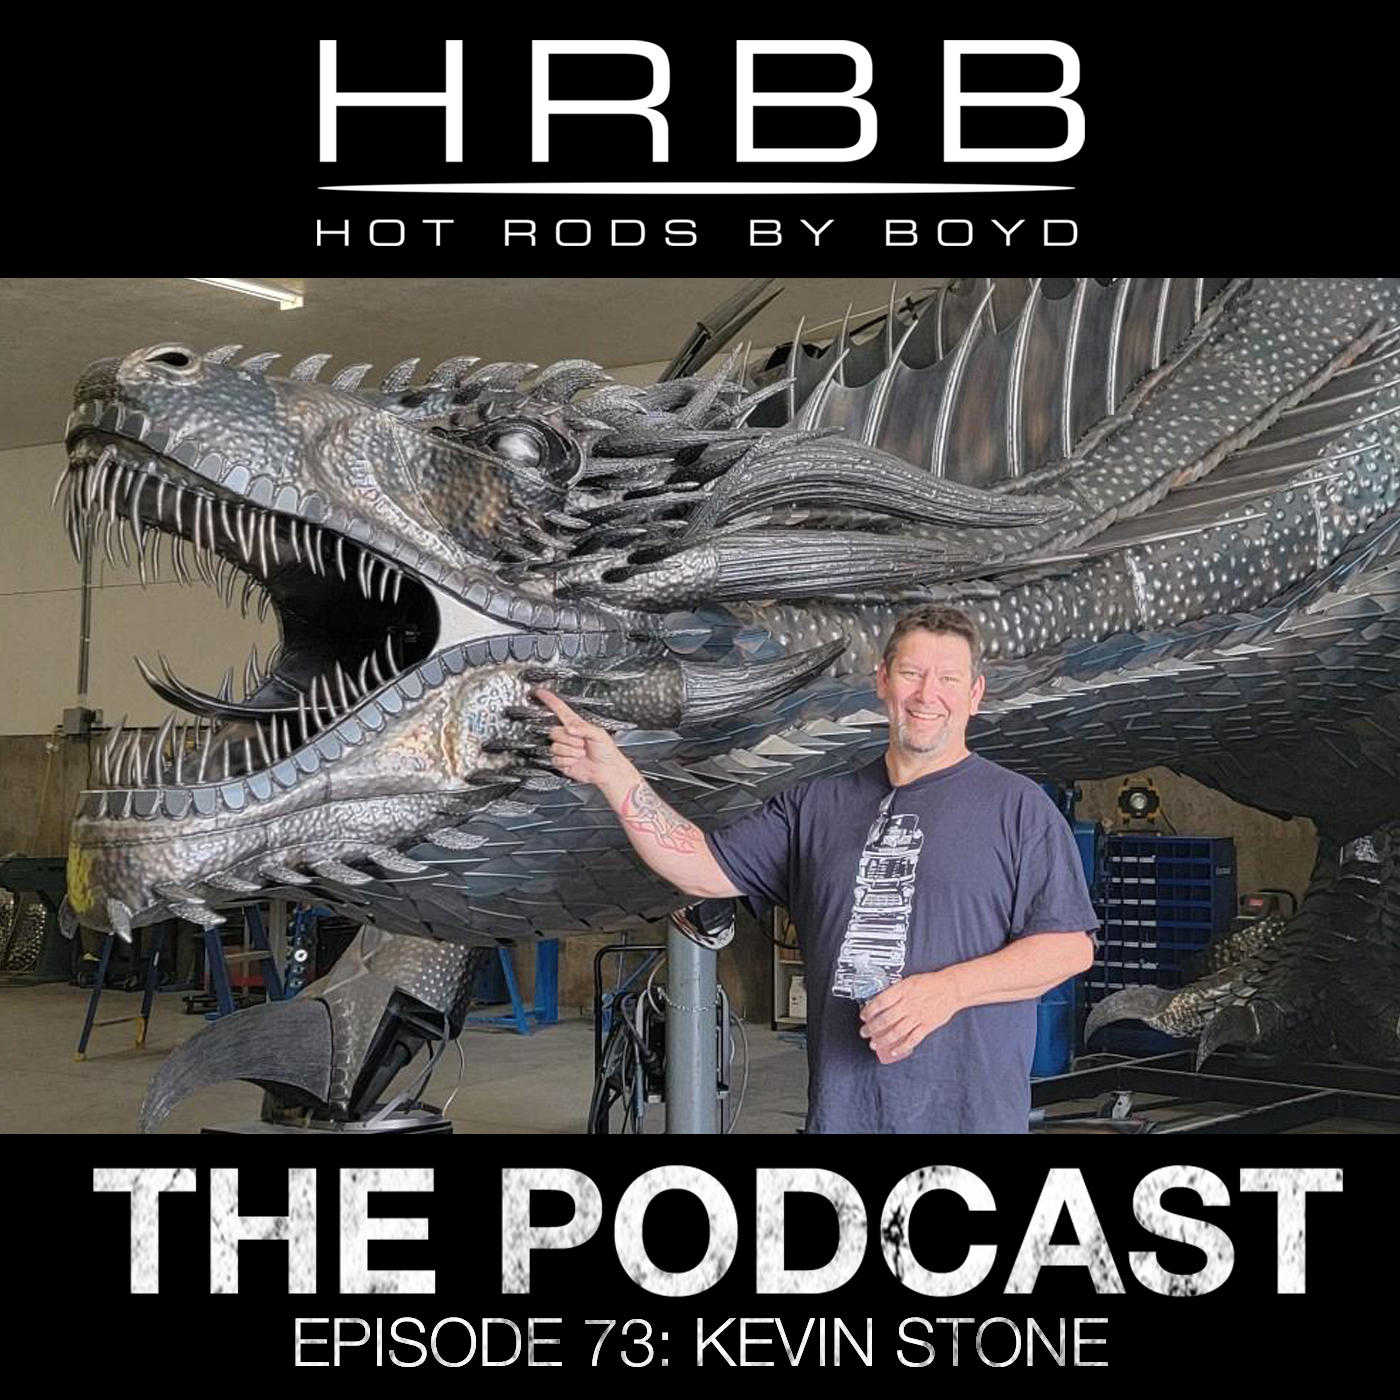 HRBB Episode 73 - Kevin Stone